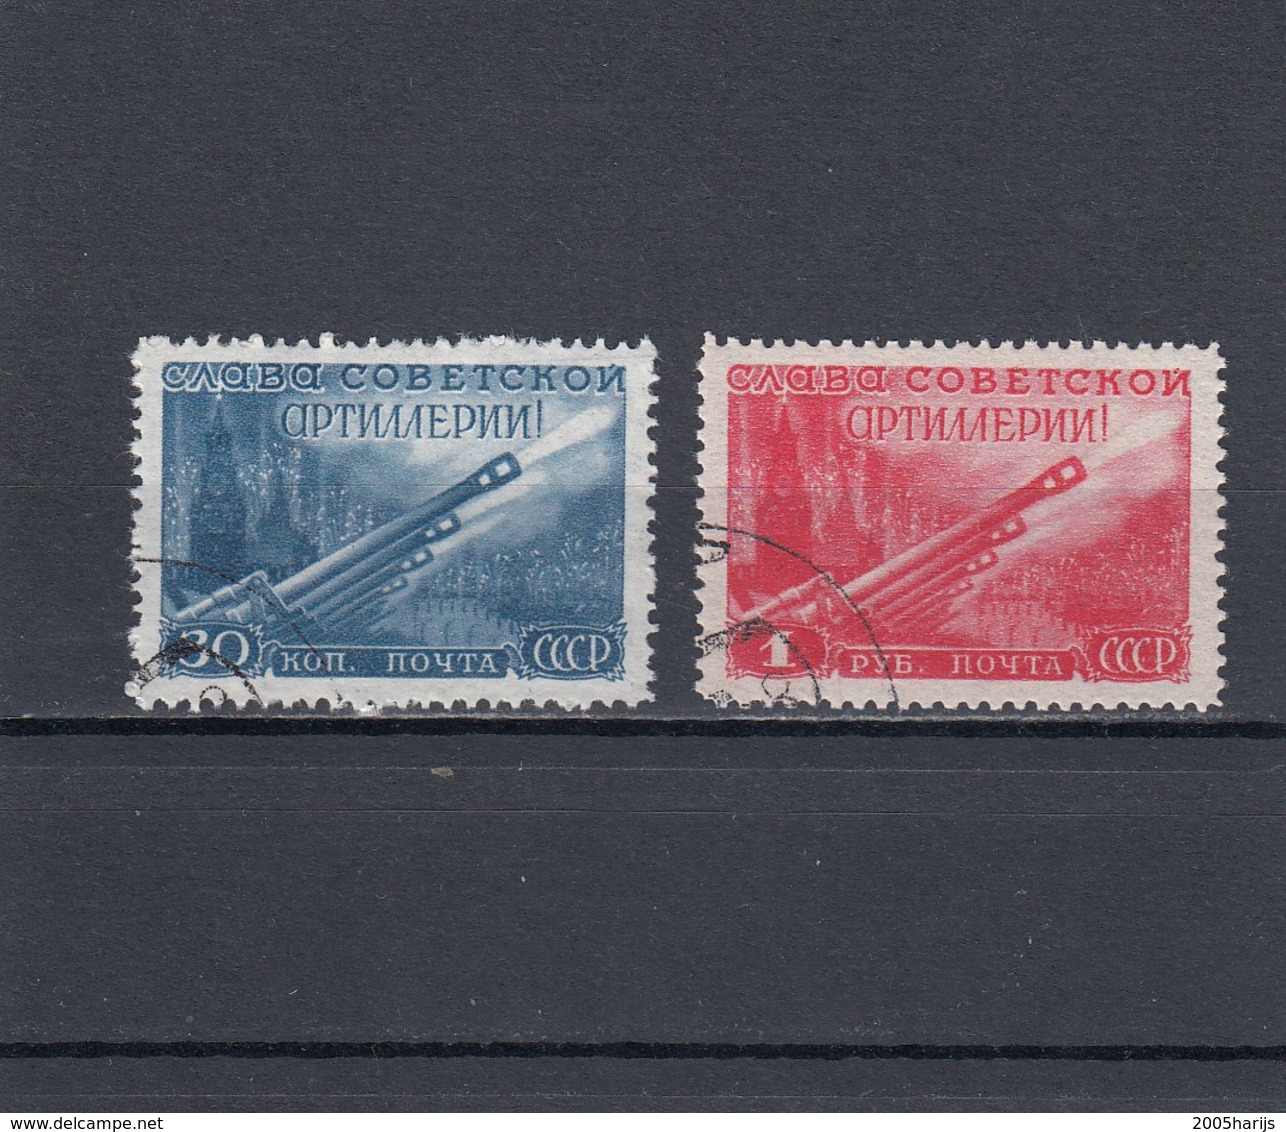 RUSSIA 1948 Used Stamps MiNr. 1290-1291 - Usati